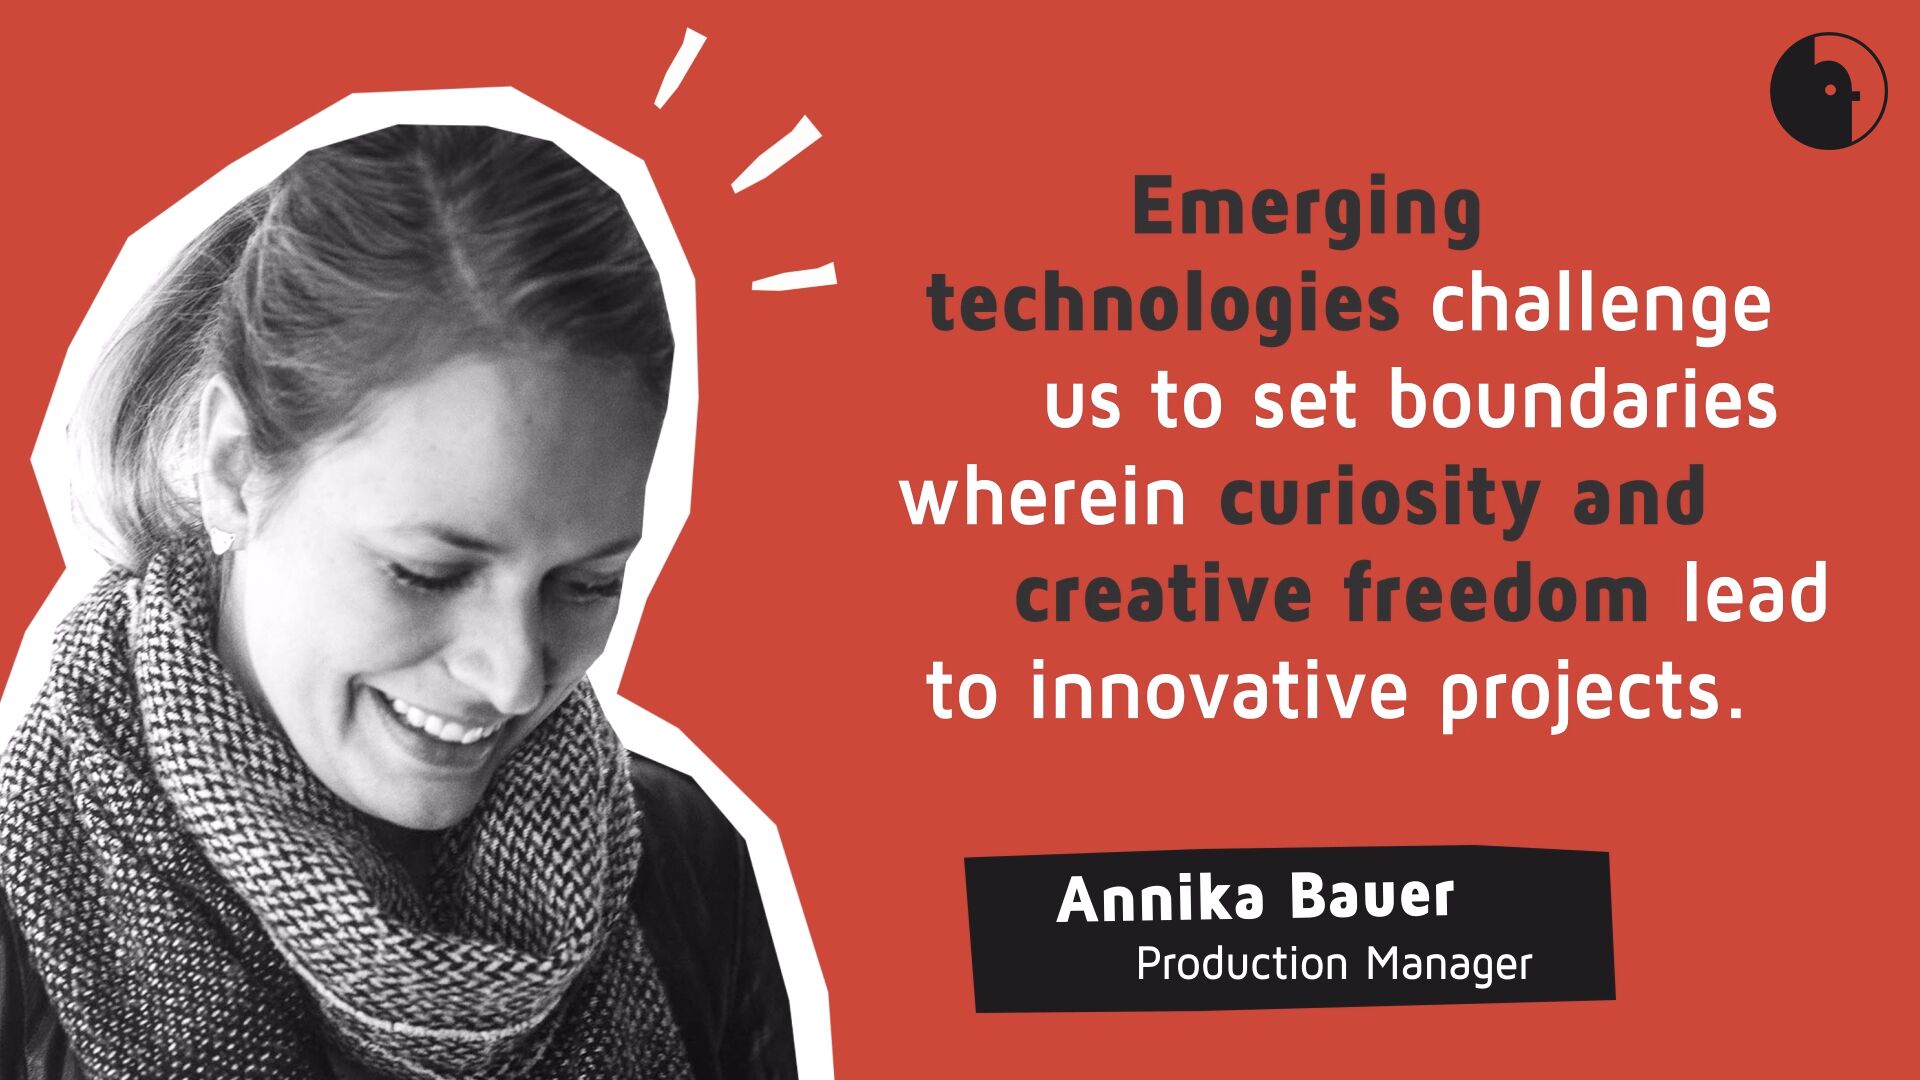 Production Manager Annika Bauer